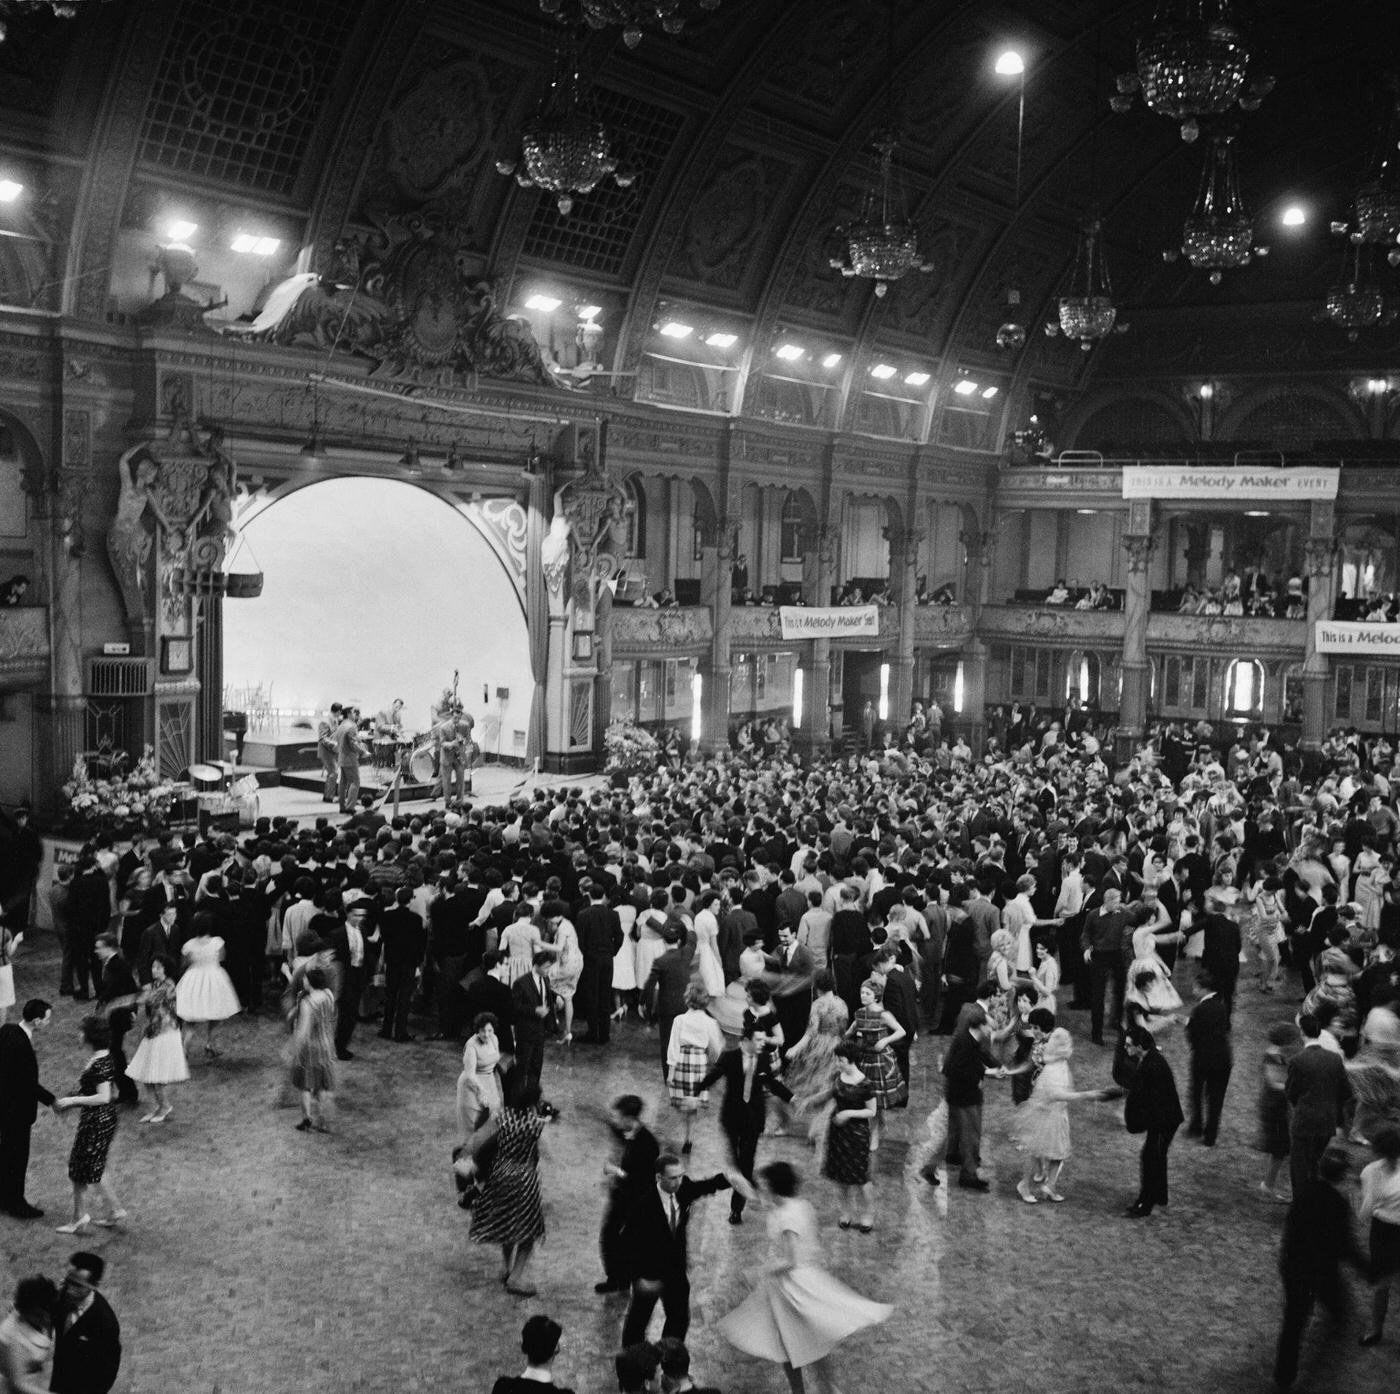 View of dancers and audience members on the dancefloor being entertained by a jazz band on stage at the Winter Gardens venue in Blackpool, Lancashire during the Melody Maker Festival in June 1961.